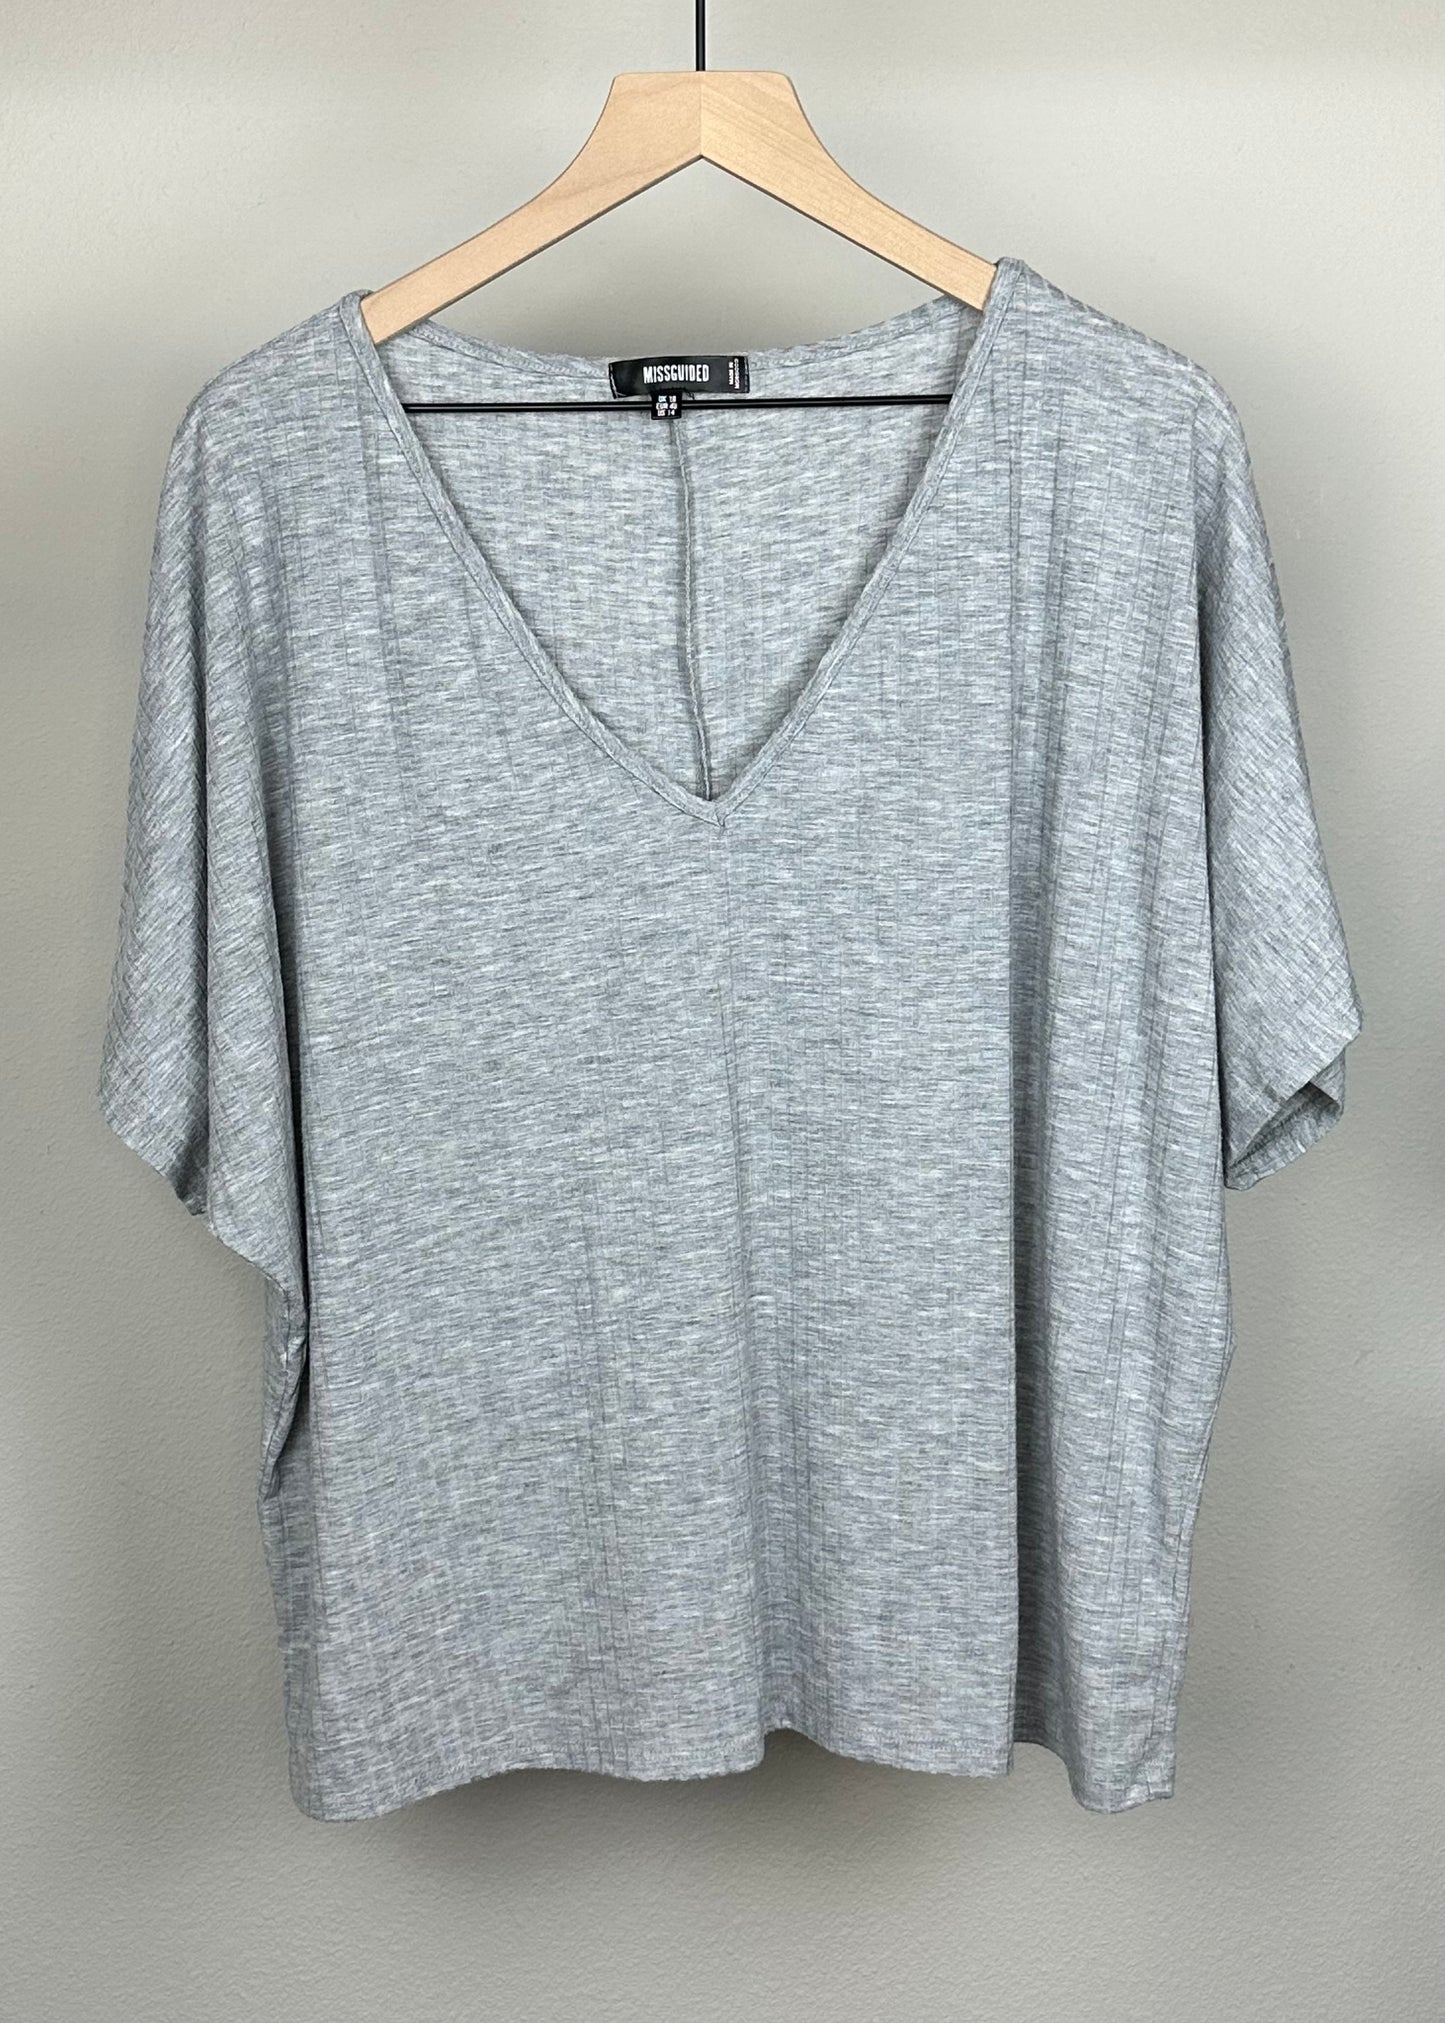 Lounging V-Neck Tee By Misguided